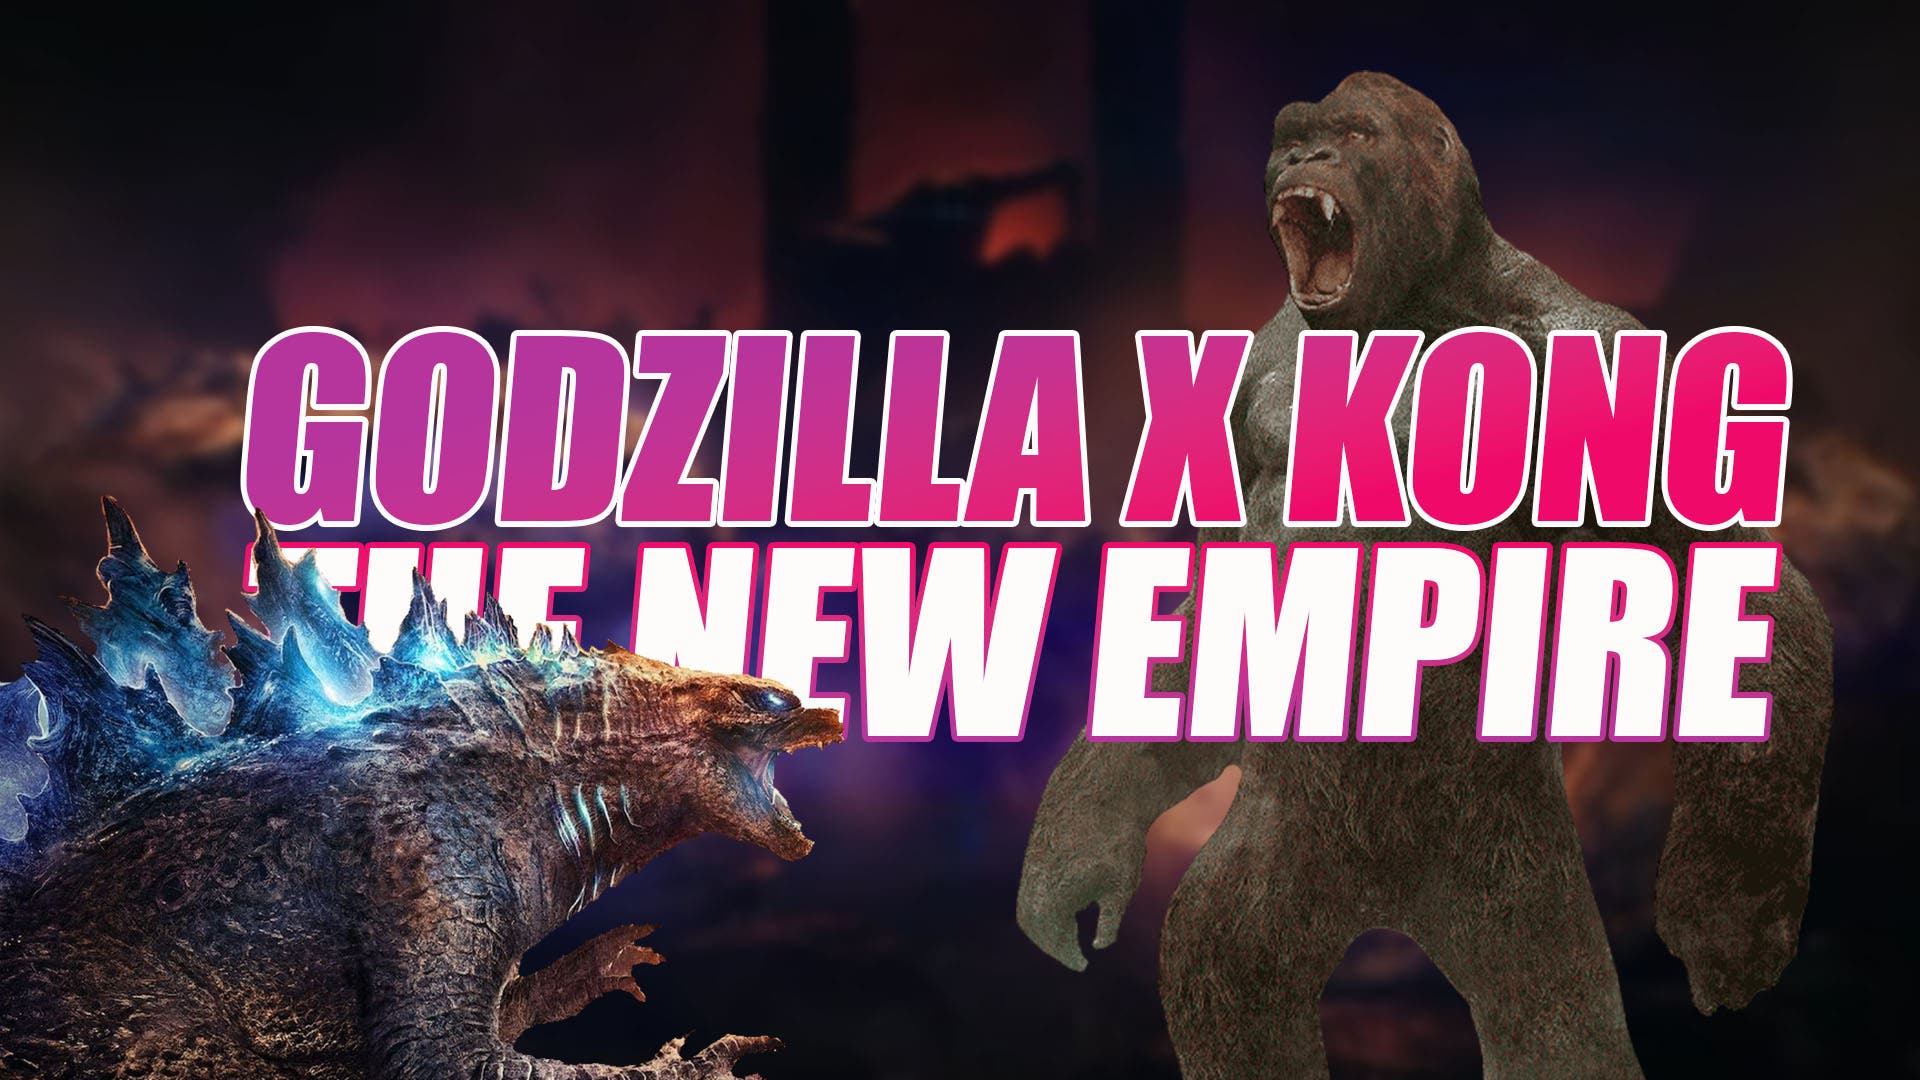 Release date, synopsis and first teaser of Godzilla x Kong: The New Empire